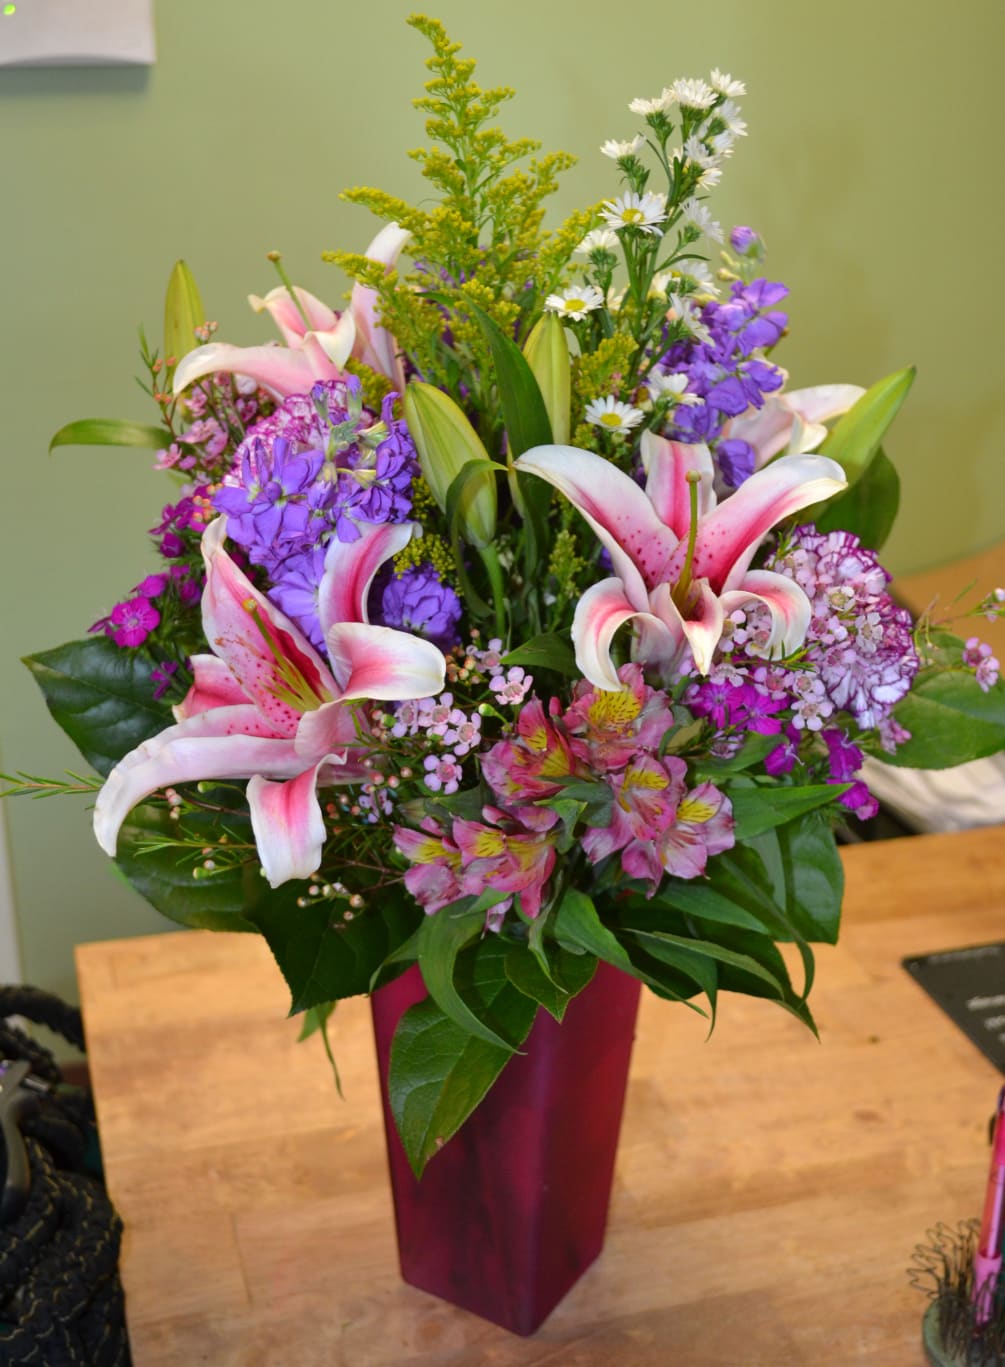 Stargazer lilies, Alstro, Stock, Carnations, Wax, Sweet William, Solidago and more in